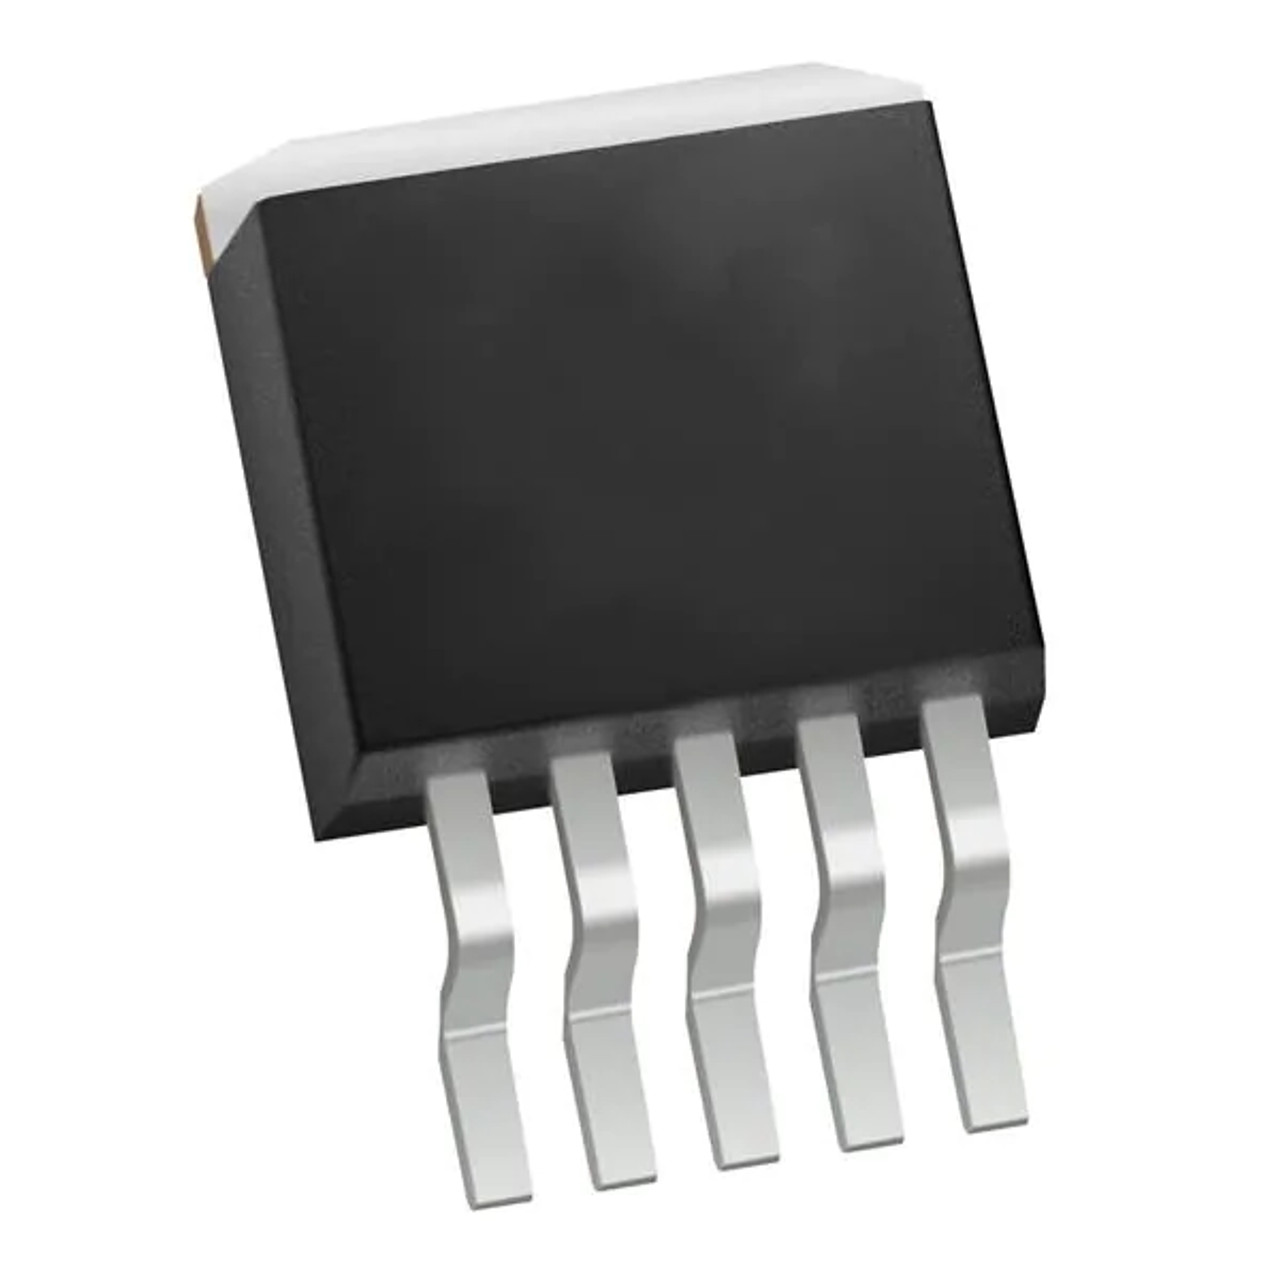 TLE42754G ; Low Dropout Linear Fixed Voltage Regulator, TO-263-5